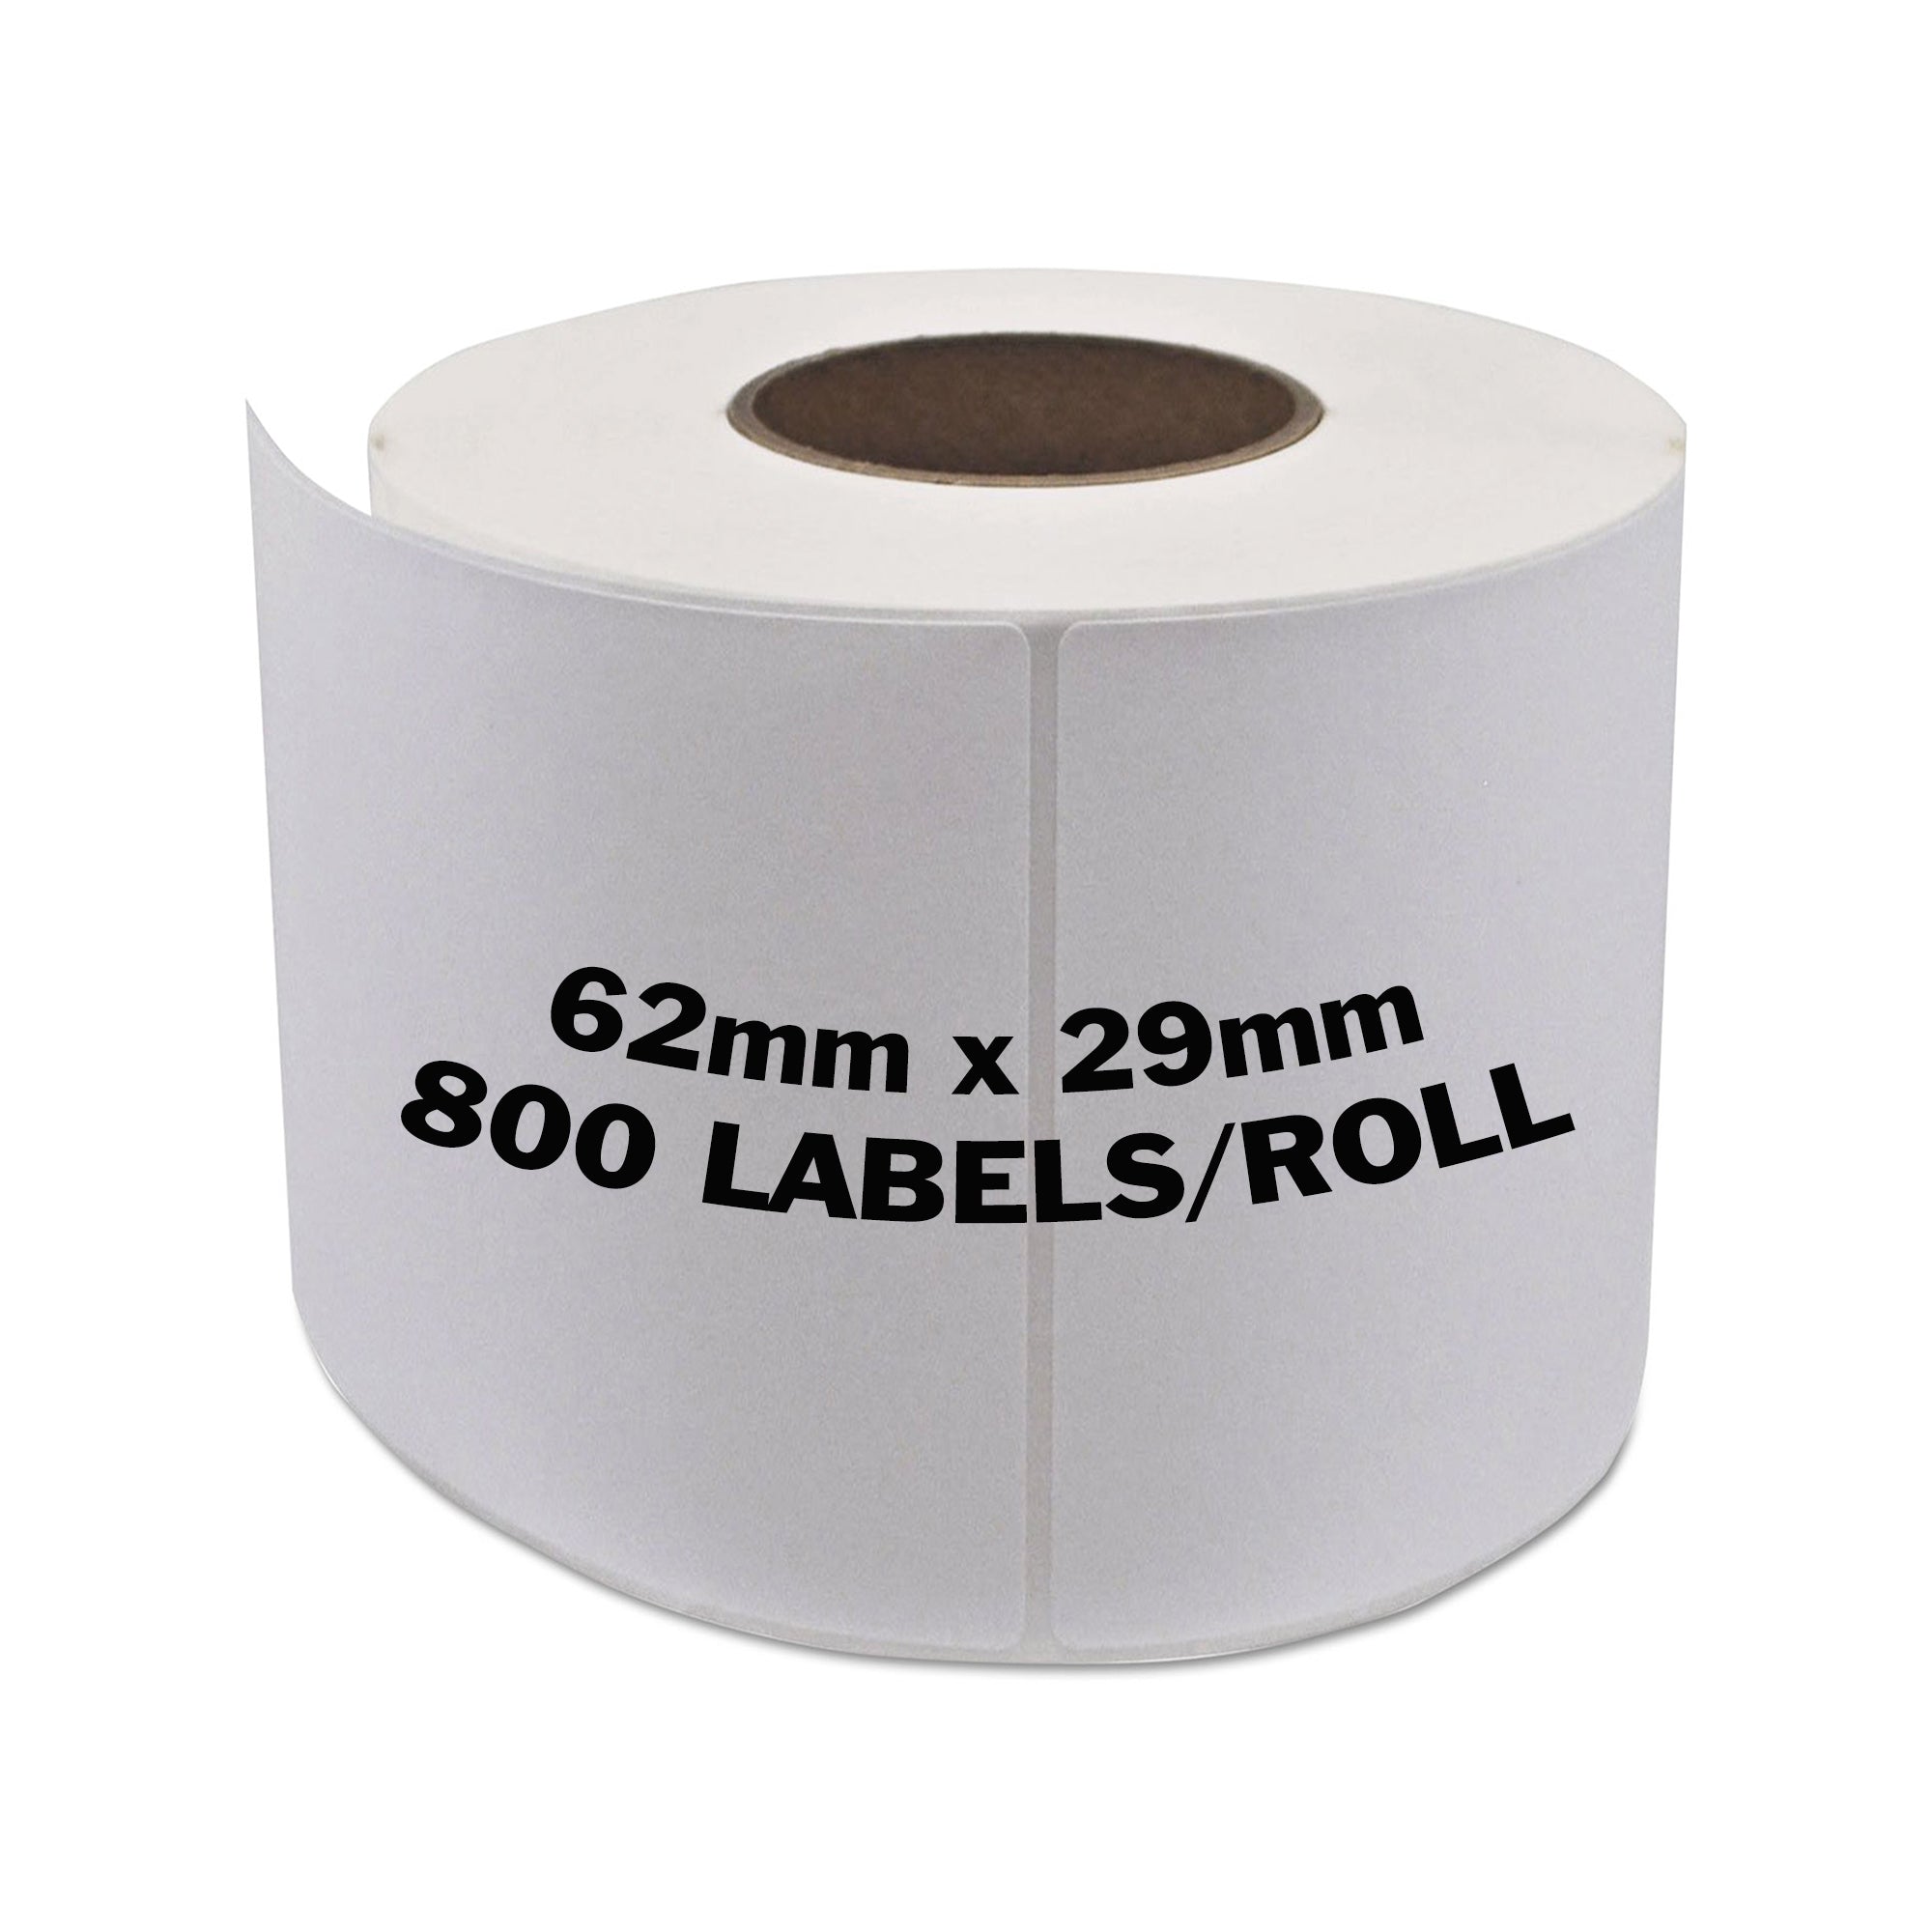 BROTHER Compatible Labels 62mm x 29mm 800 Labels/Roll [DK11209]